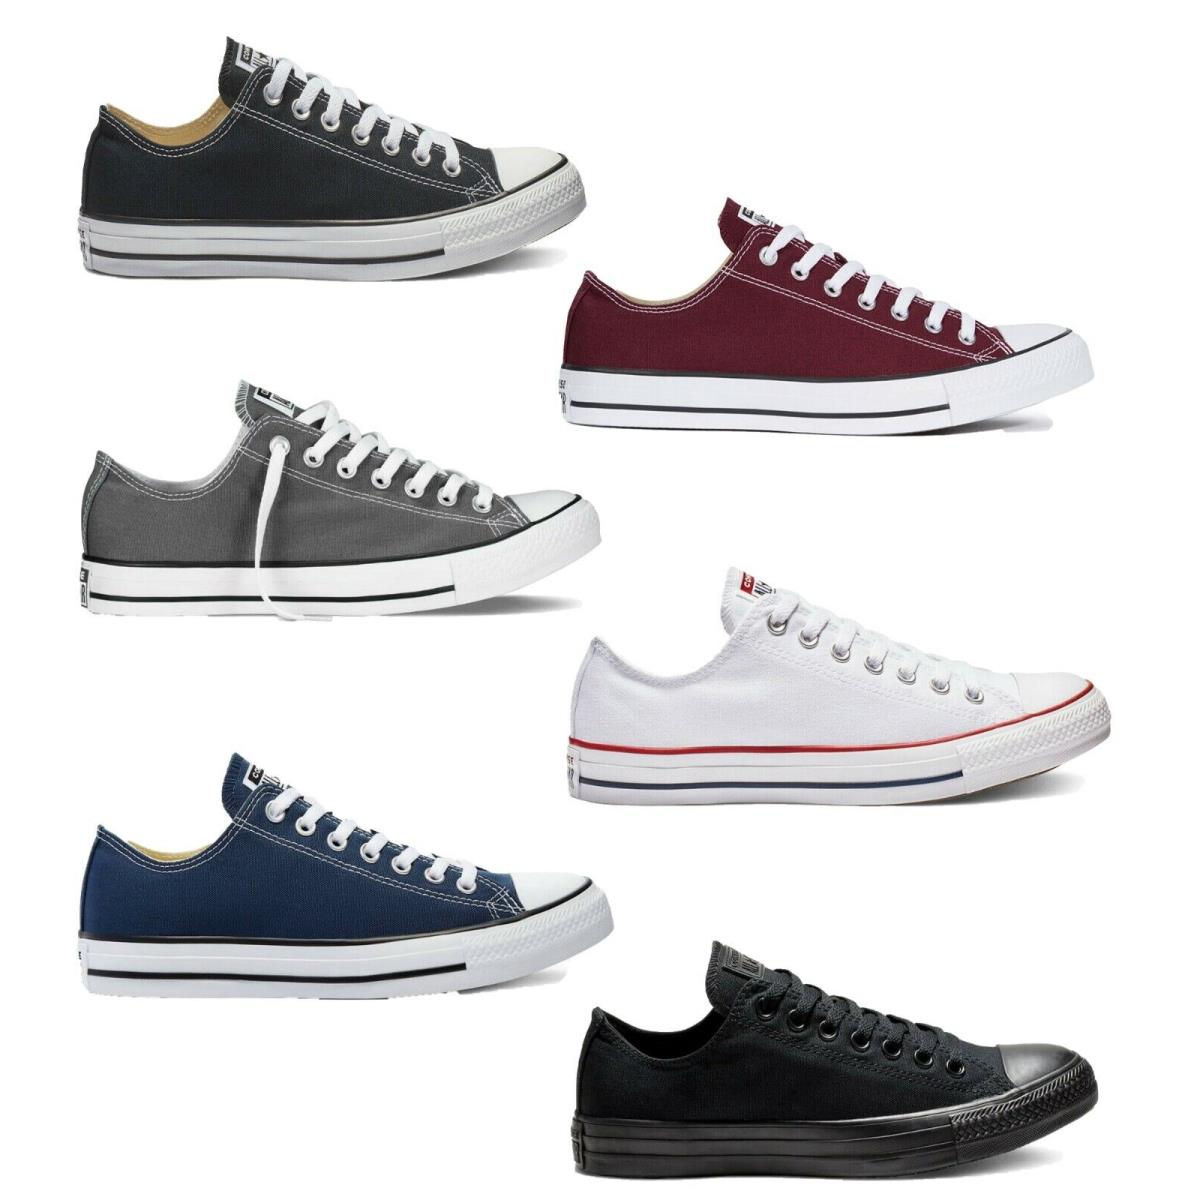 Converse Chuck Taylor All Star Low Top Unisex Canvas Sneaker Shoes - Maroon